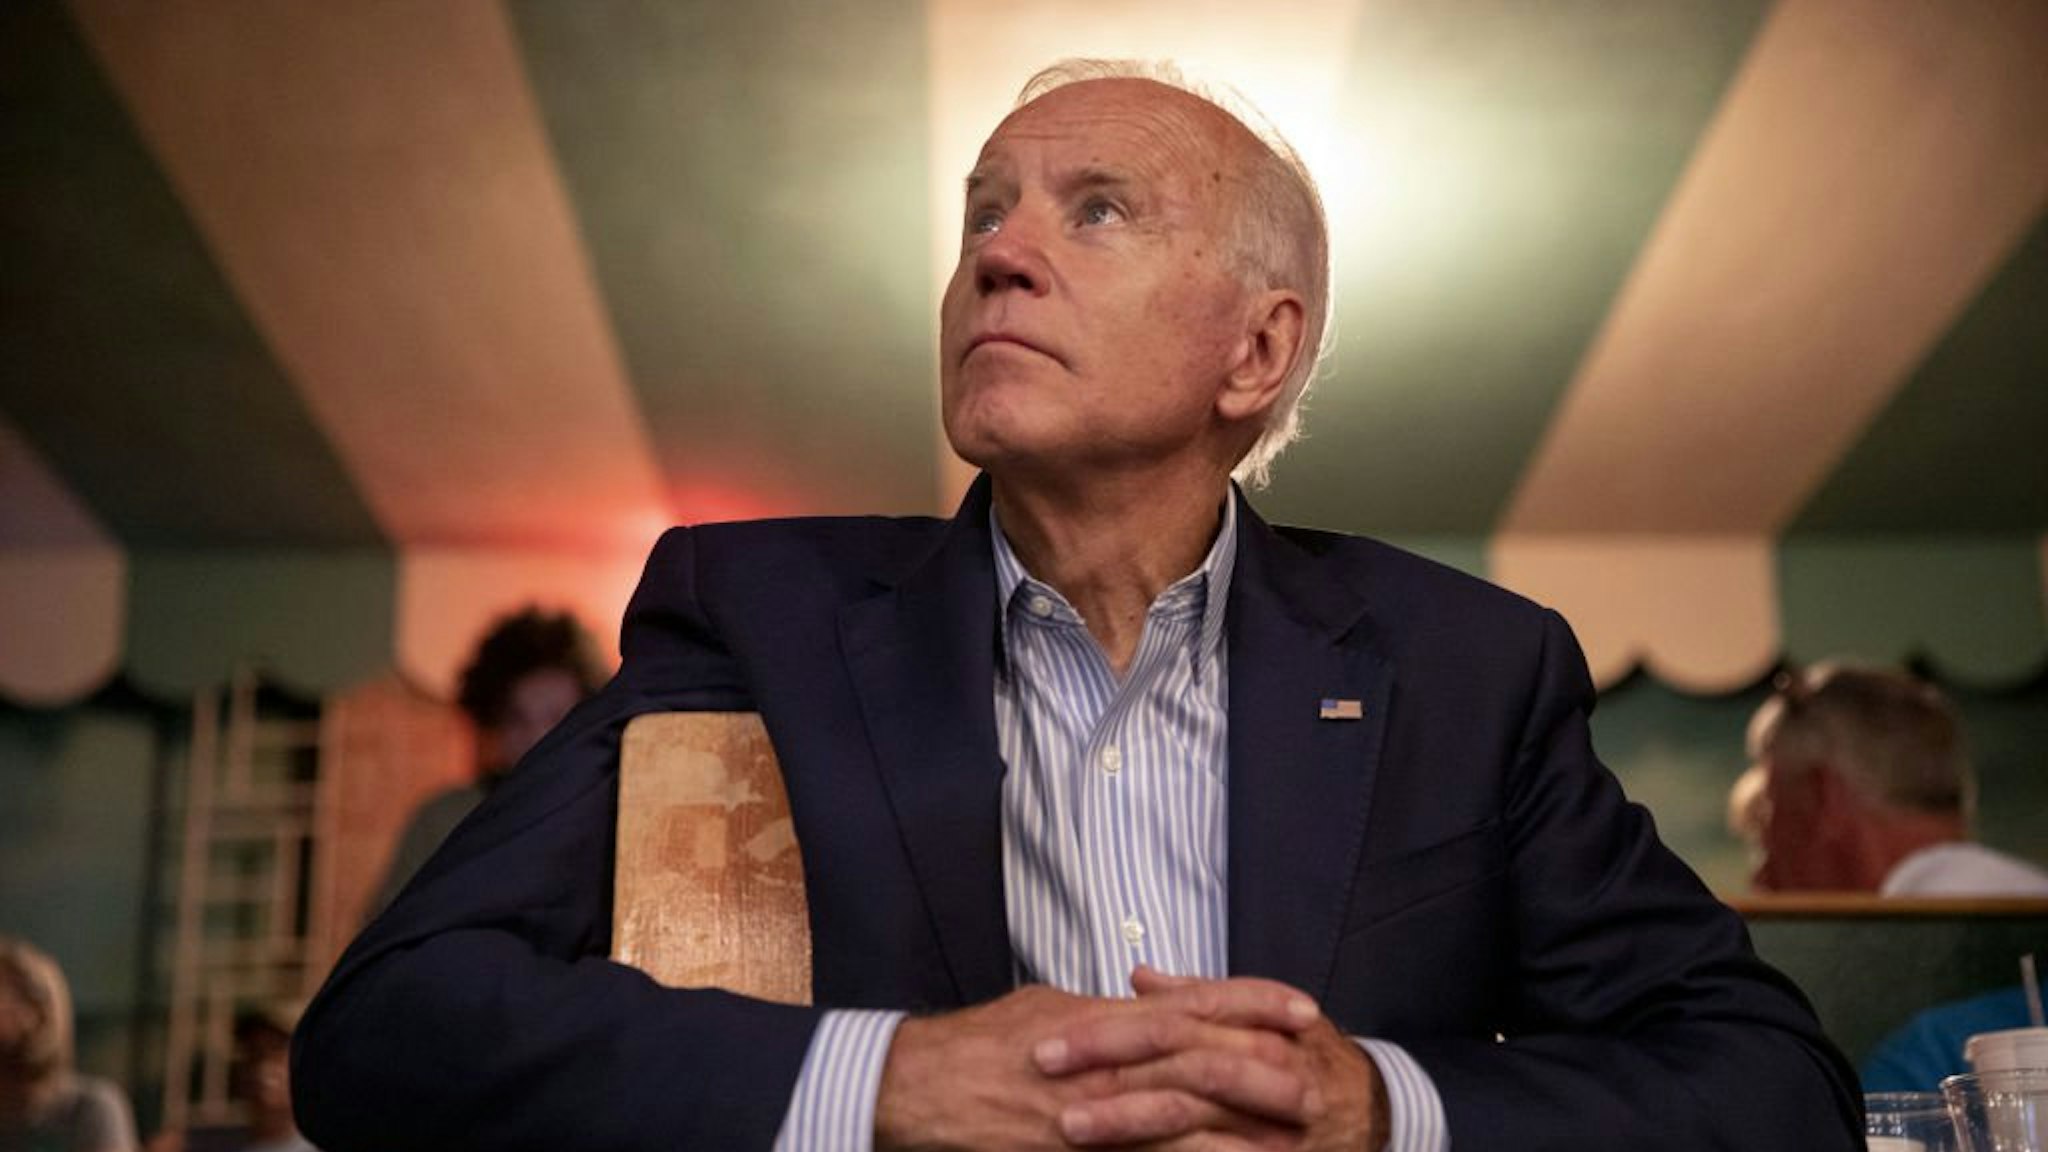 Former U.S. Vice President Joe Biden, 2020 Democratic presidential candidate, listens during a video presentation at the Democratic Wing Ding event in Clear Lake, Iowa, U.S., on Friday, Aug. 9, 2019.